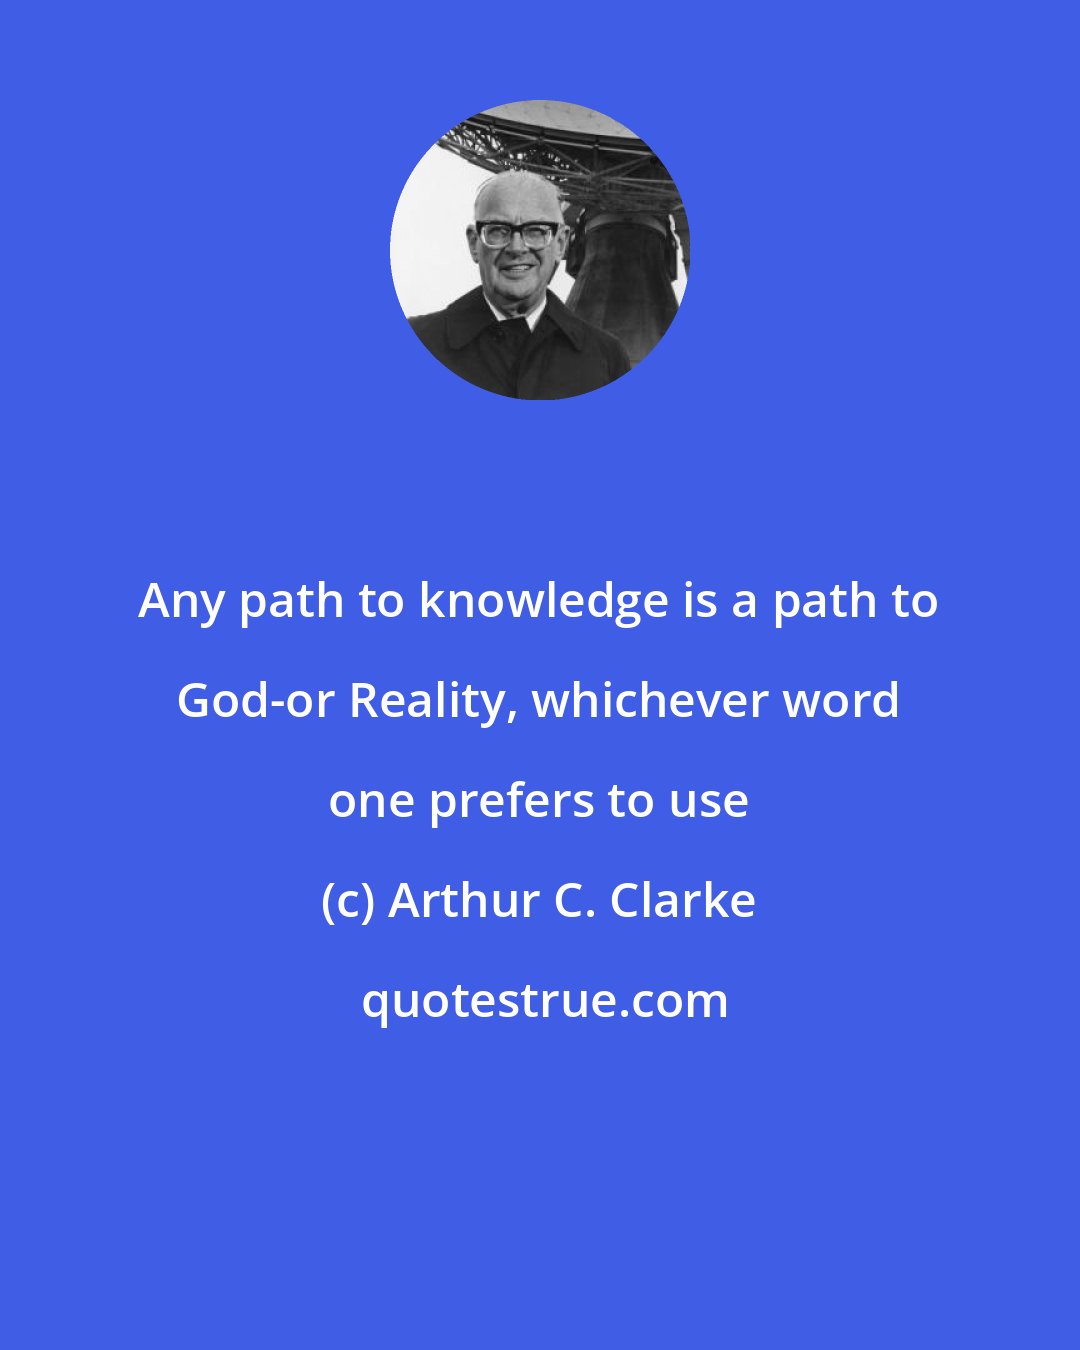 Arthur C. Clarke: Any path to knowledge is a path to God-or Reality, whichever word one prefers to use